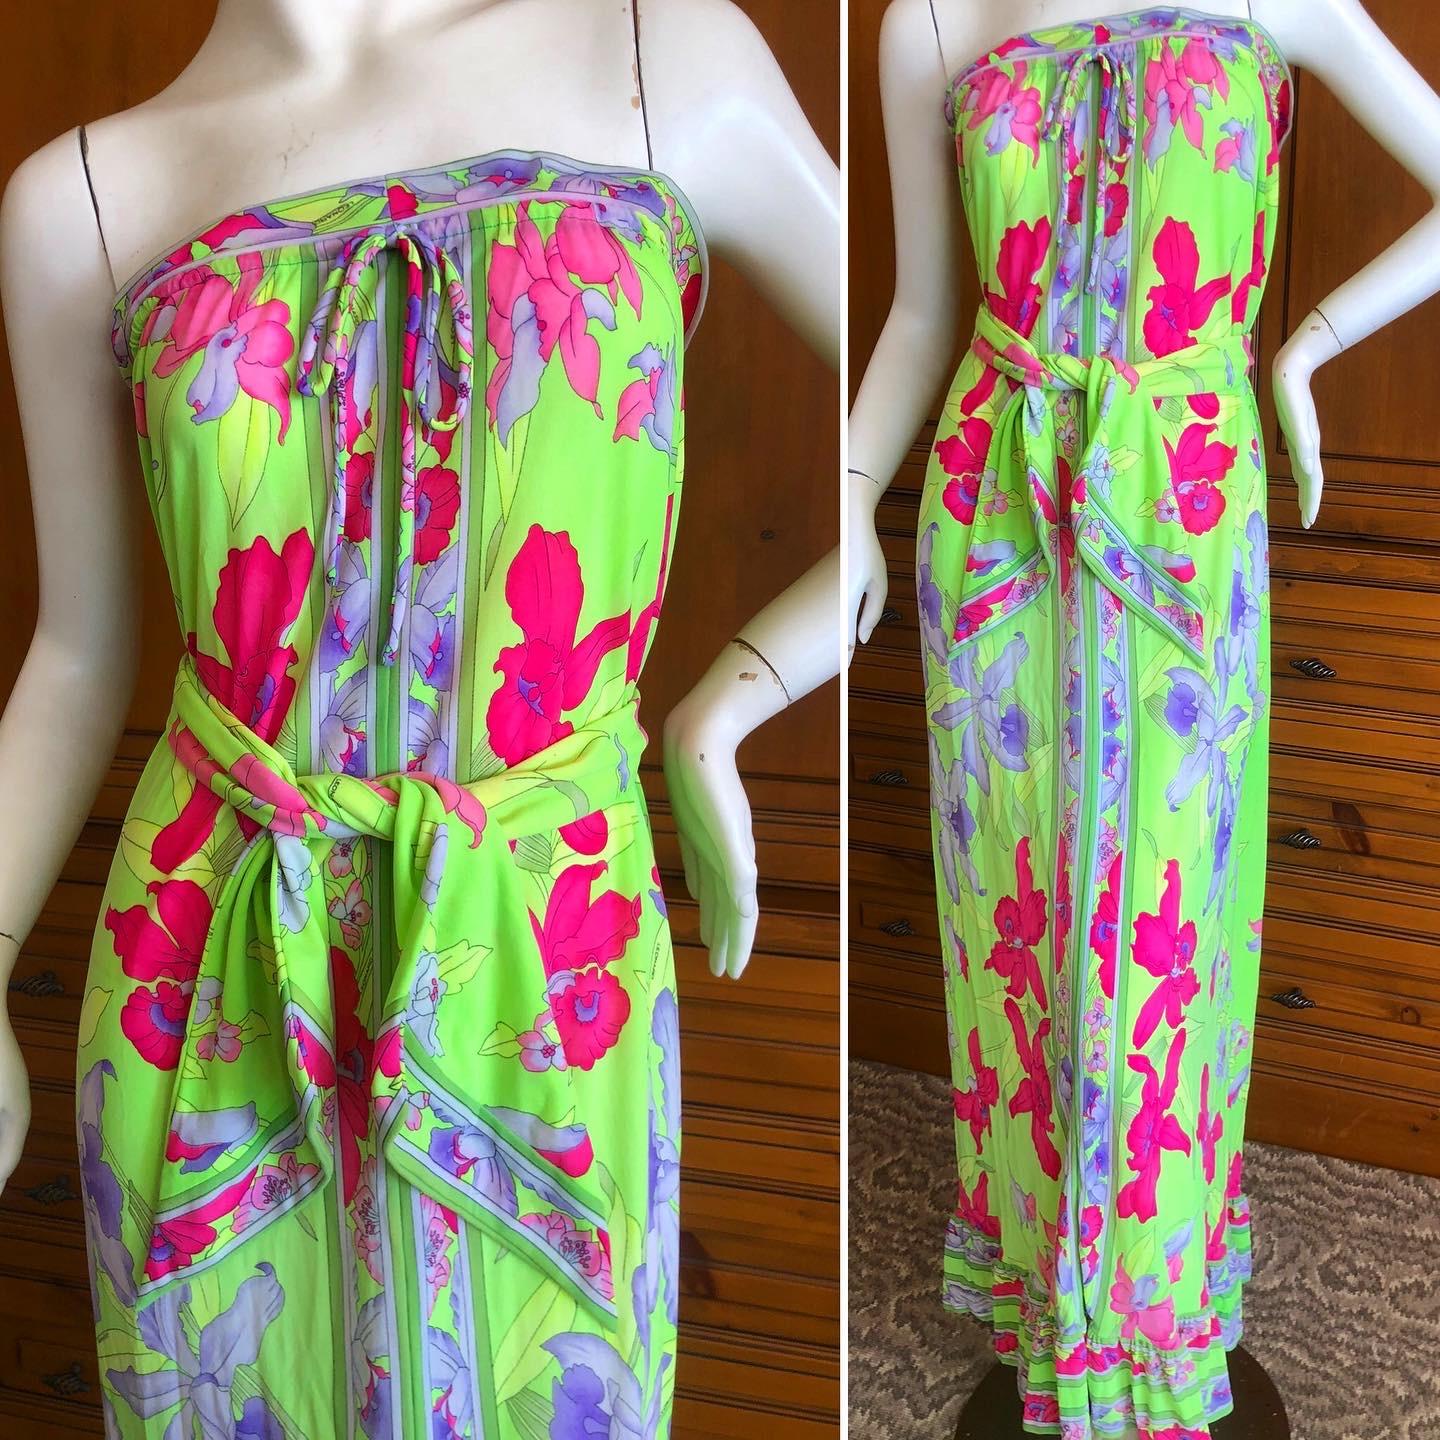 Leonard Paris Silk Jersey Vintage Strapless Long Floral Dress with Sash Tie.
There are detachable straps if you want to wear with straps, but the elastic at the bust holds it up.
So pretty, please use the zoom lens to see details.
Leonard Paris was